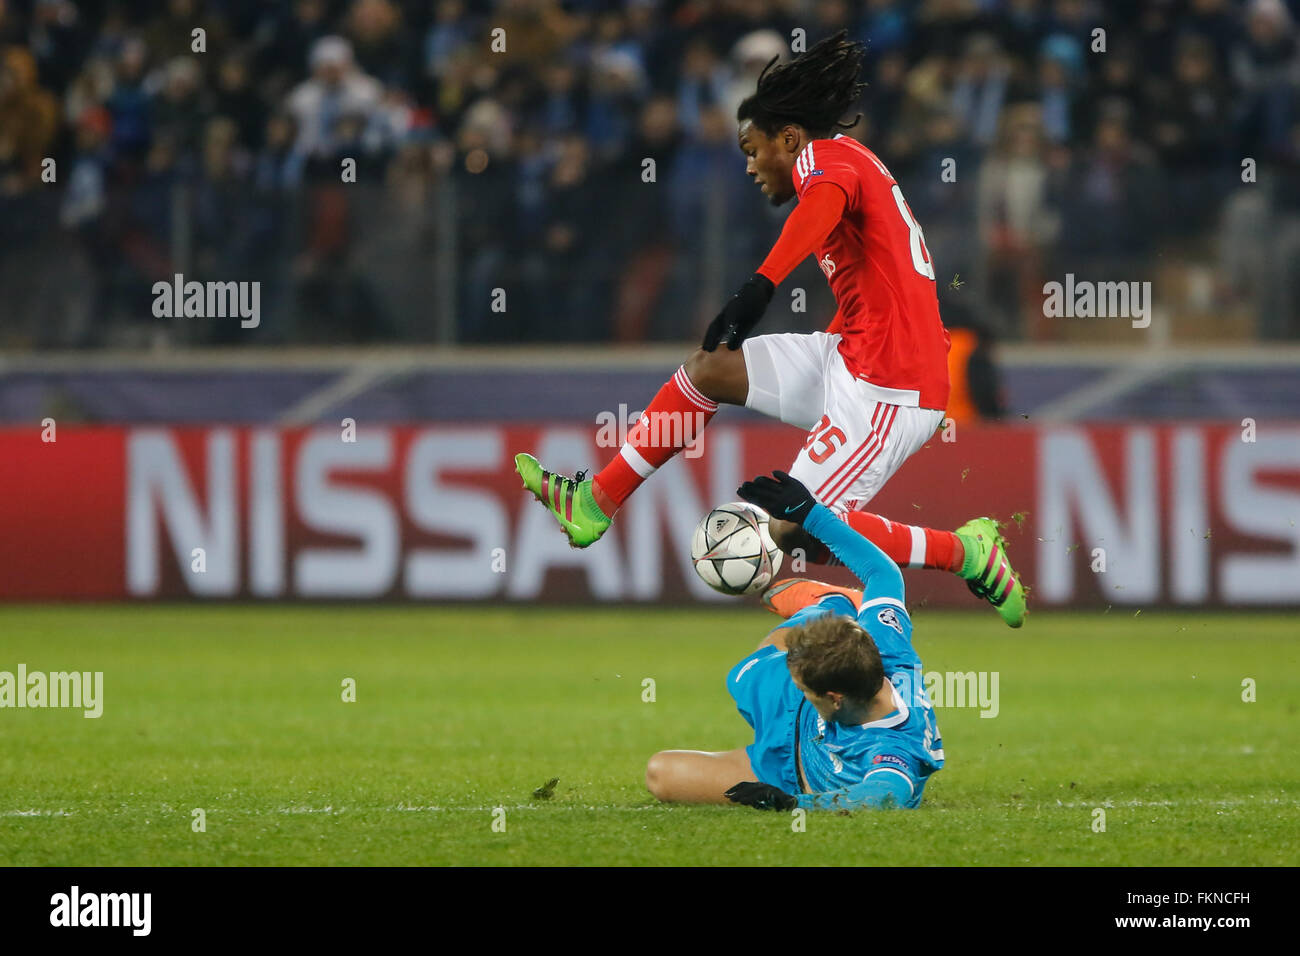 St. Petersburg, Russia. 9th March, 2016. Renato Sanches (top) of Benfica vies for the ball with Aleksandr Kokorin of Zenit during the UEFA Champions League Round of 16 second leg match between FC Zenit St. Petersburg and SL Benfica at Petrovsky stadium. Credit:  Mike Kireev/Alamy Live News Stock Photo